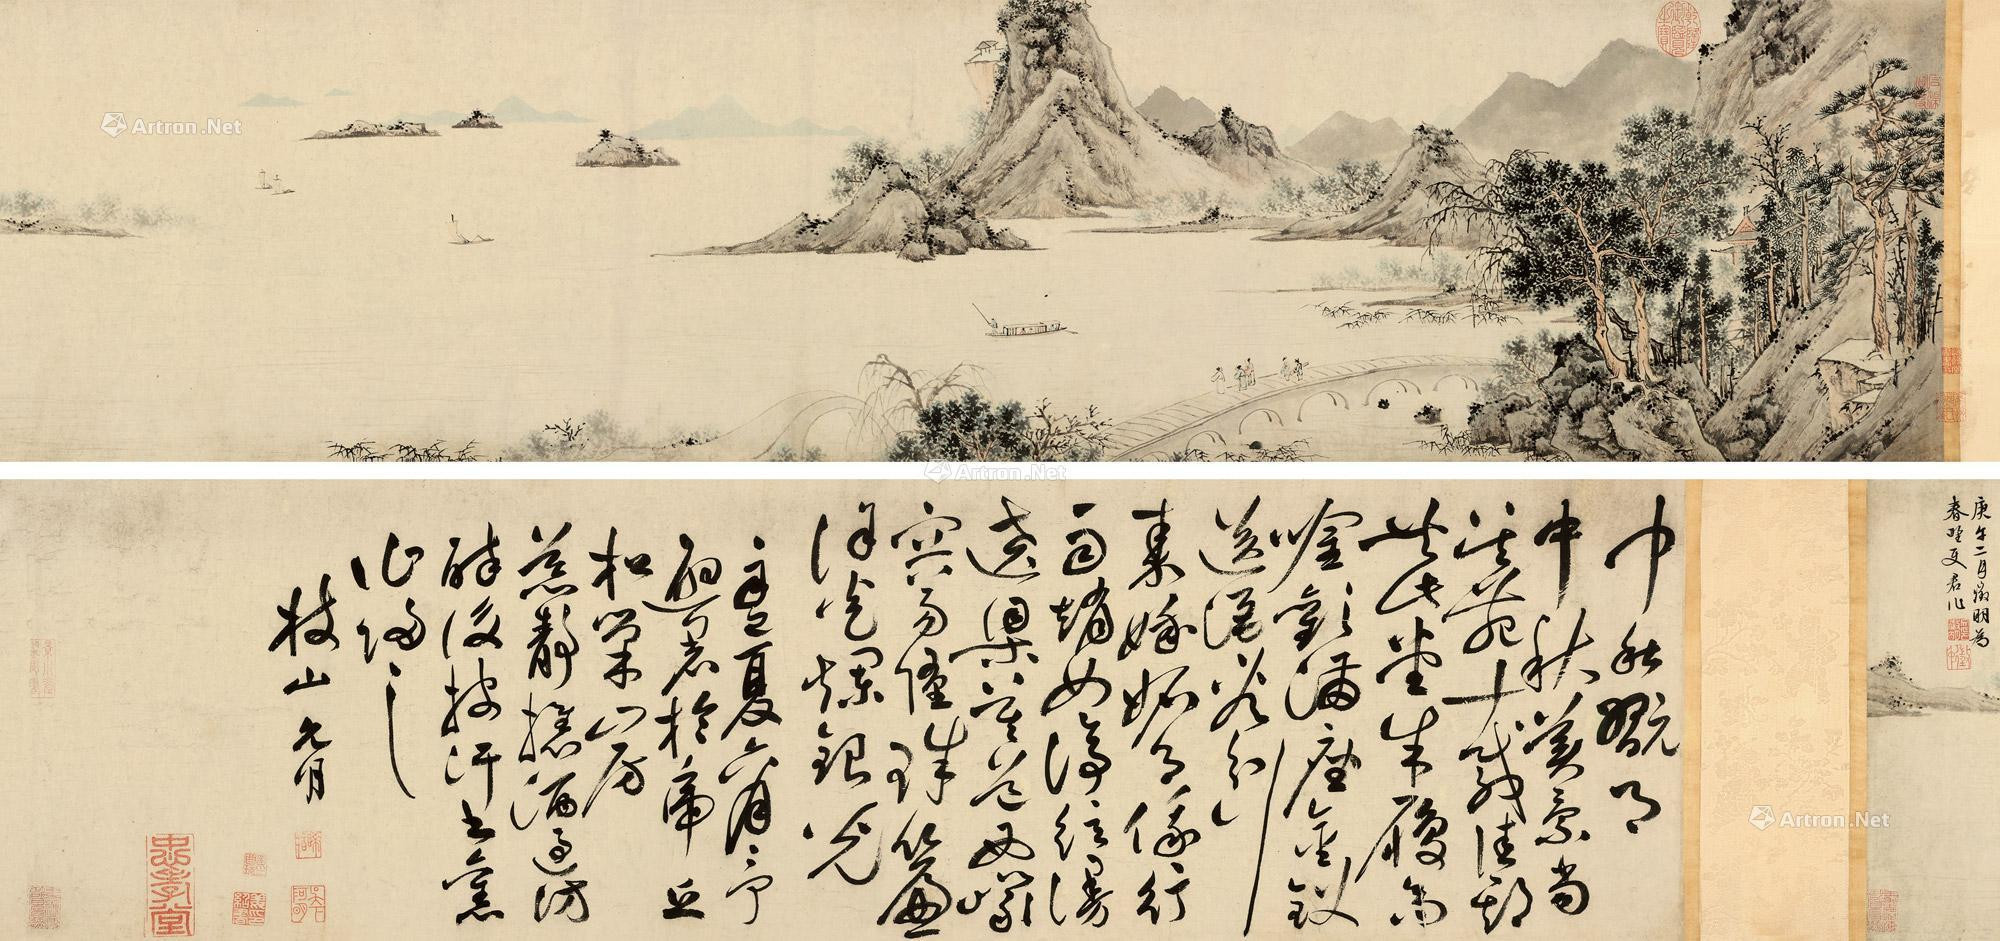 LANDSCAPE OF WUSHAN AND CALLIGRAPHY IN CURSIVE SCRIPT